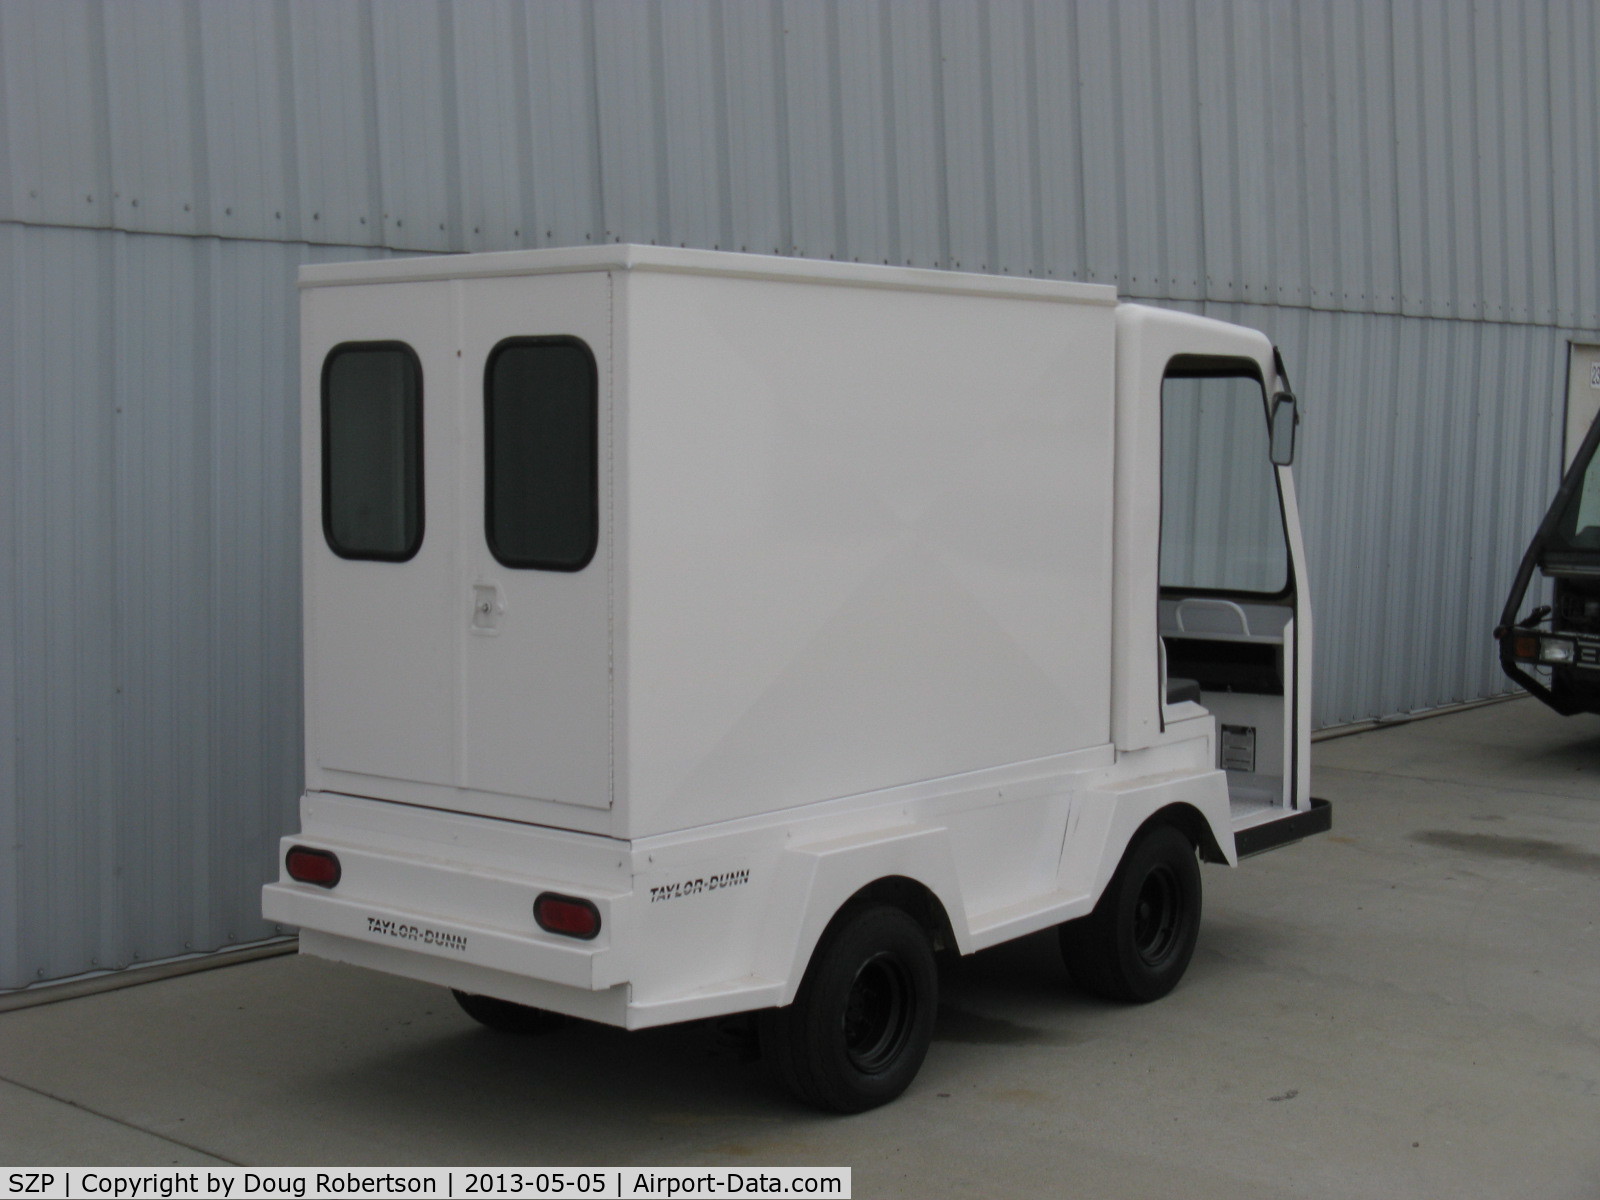 Santa Paula Airport (SZP) - The airport has many forms of personal ground transportation. Here is a Taylor-Dunn electric vehicle for two with enclosed cargo capability.